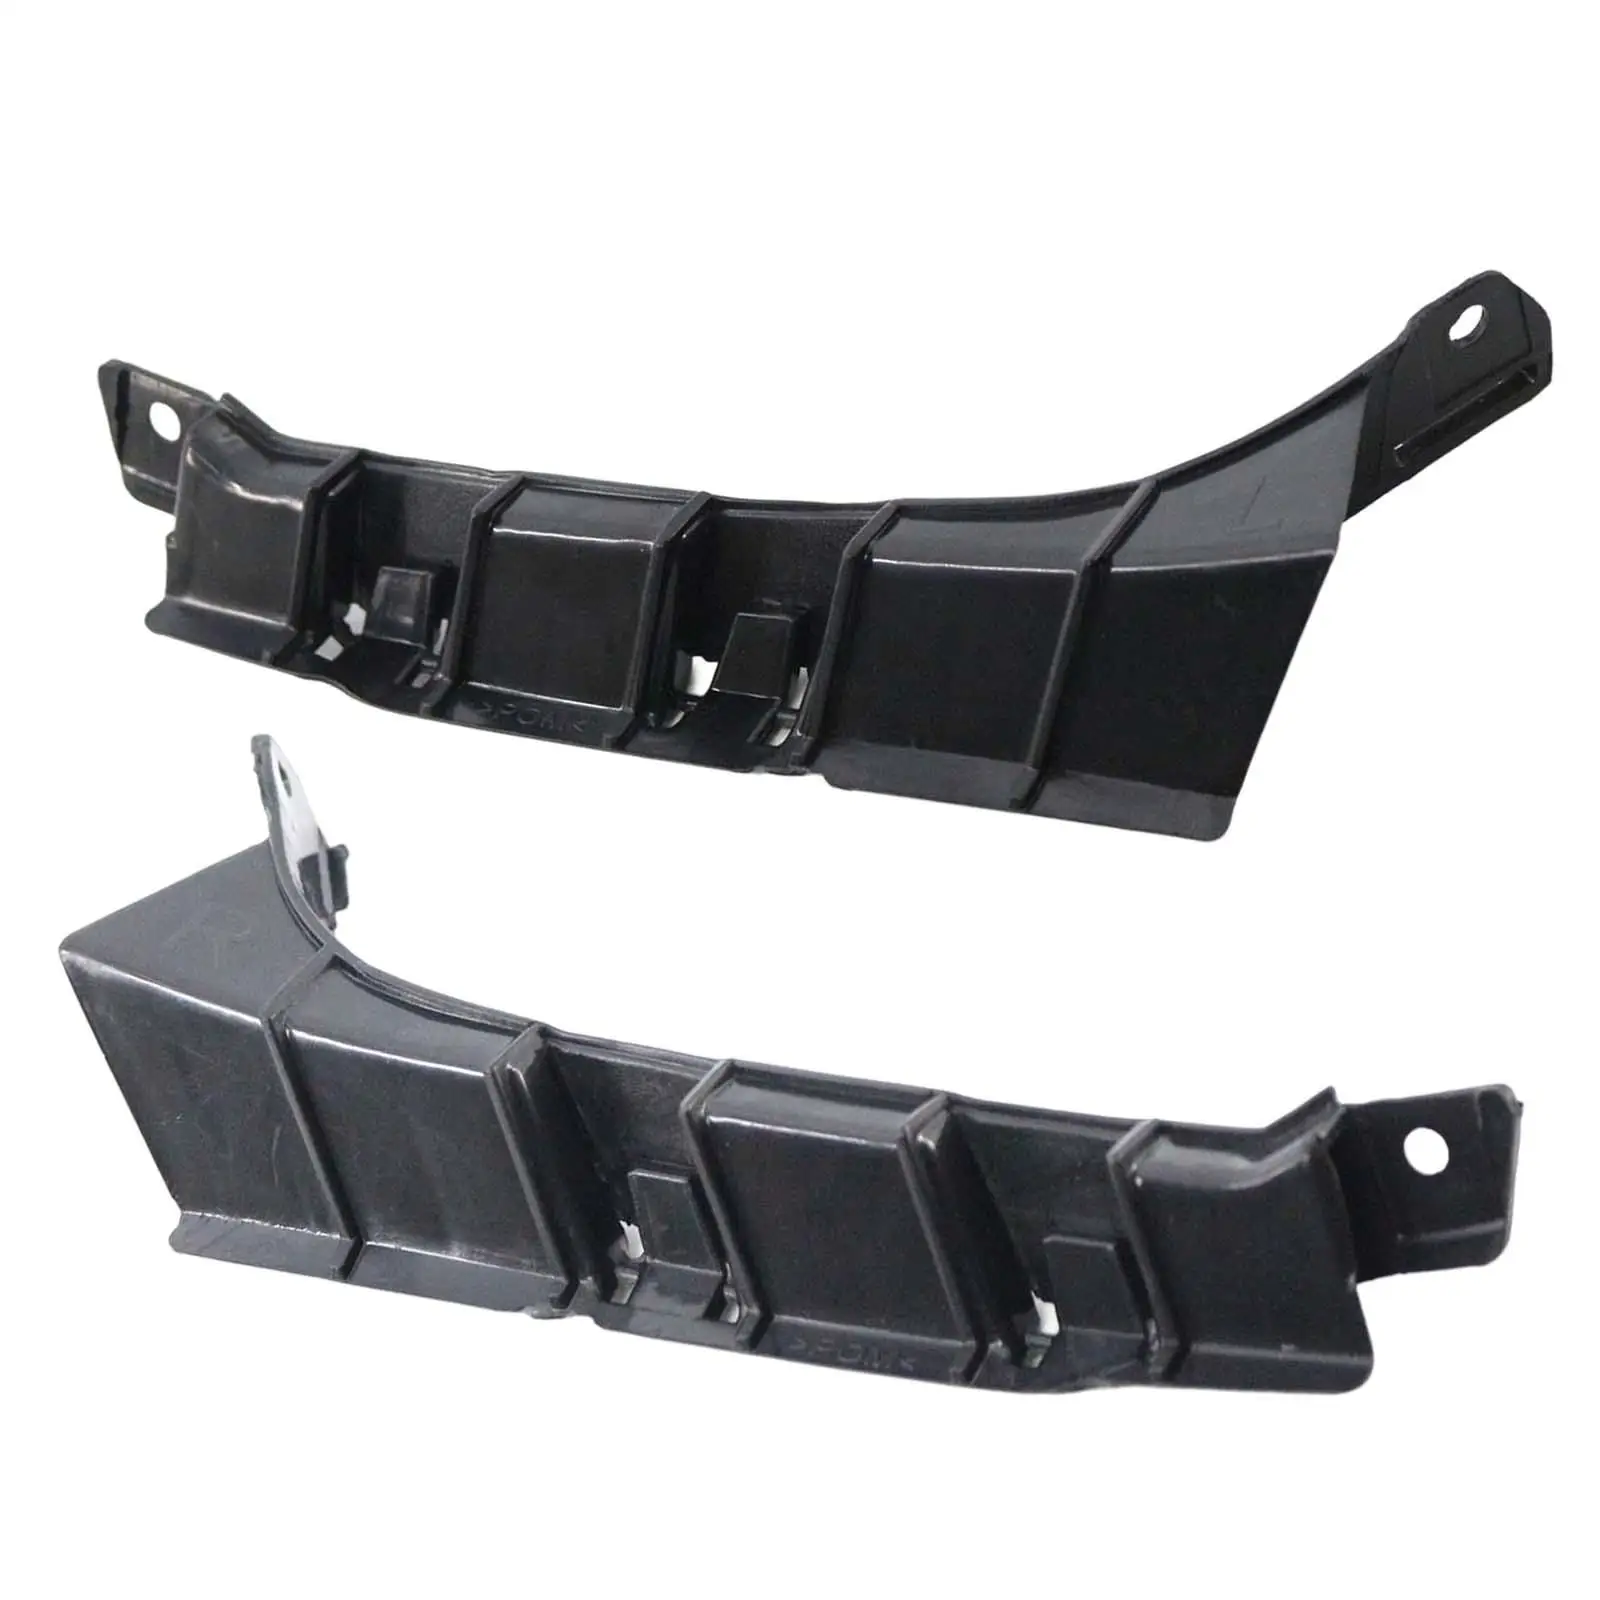 Car Front Bumper Bracket Holder Cover Durable for x5 E53 Spare Parts Replace Easy to Install Accessories